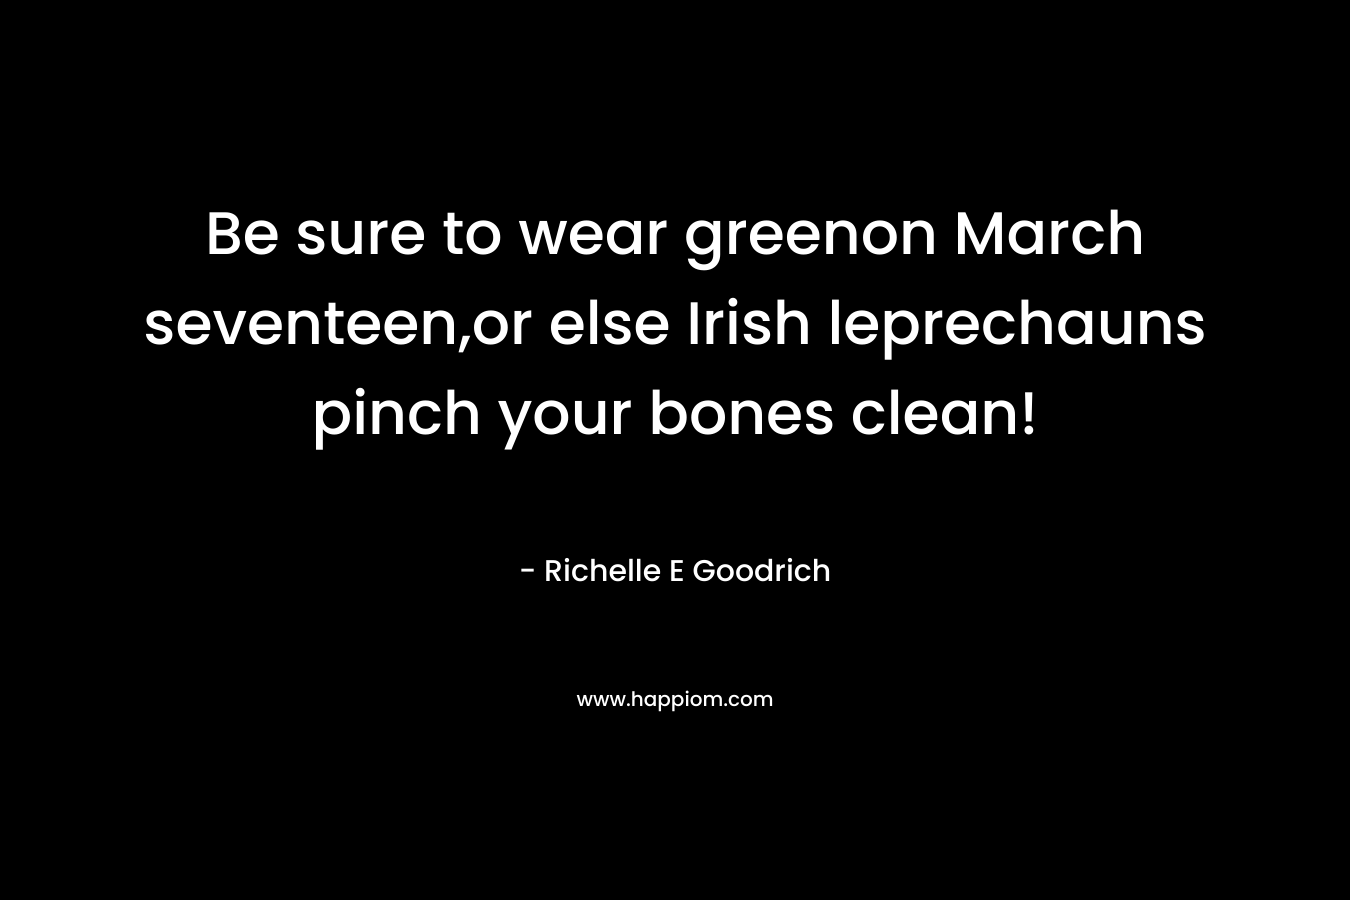 Be sure to wear greenon March seventeen,or else Irish leprechauns pinch your bones clean!